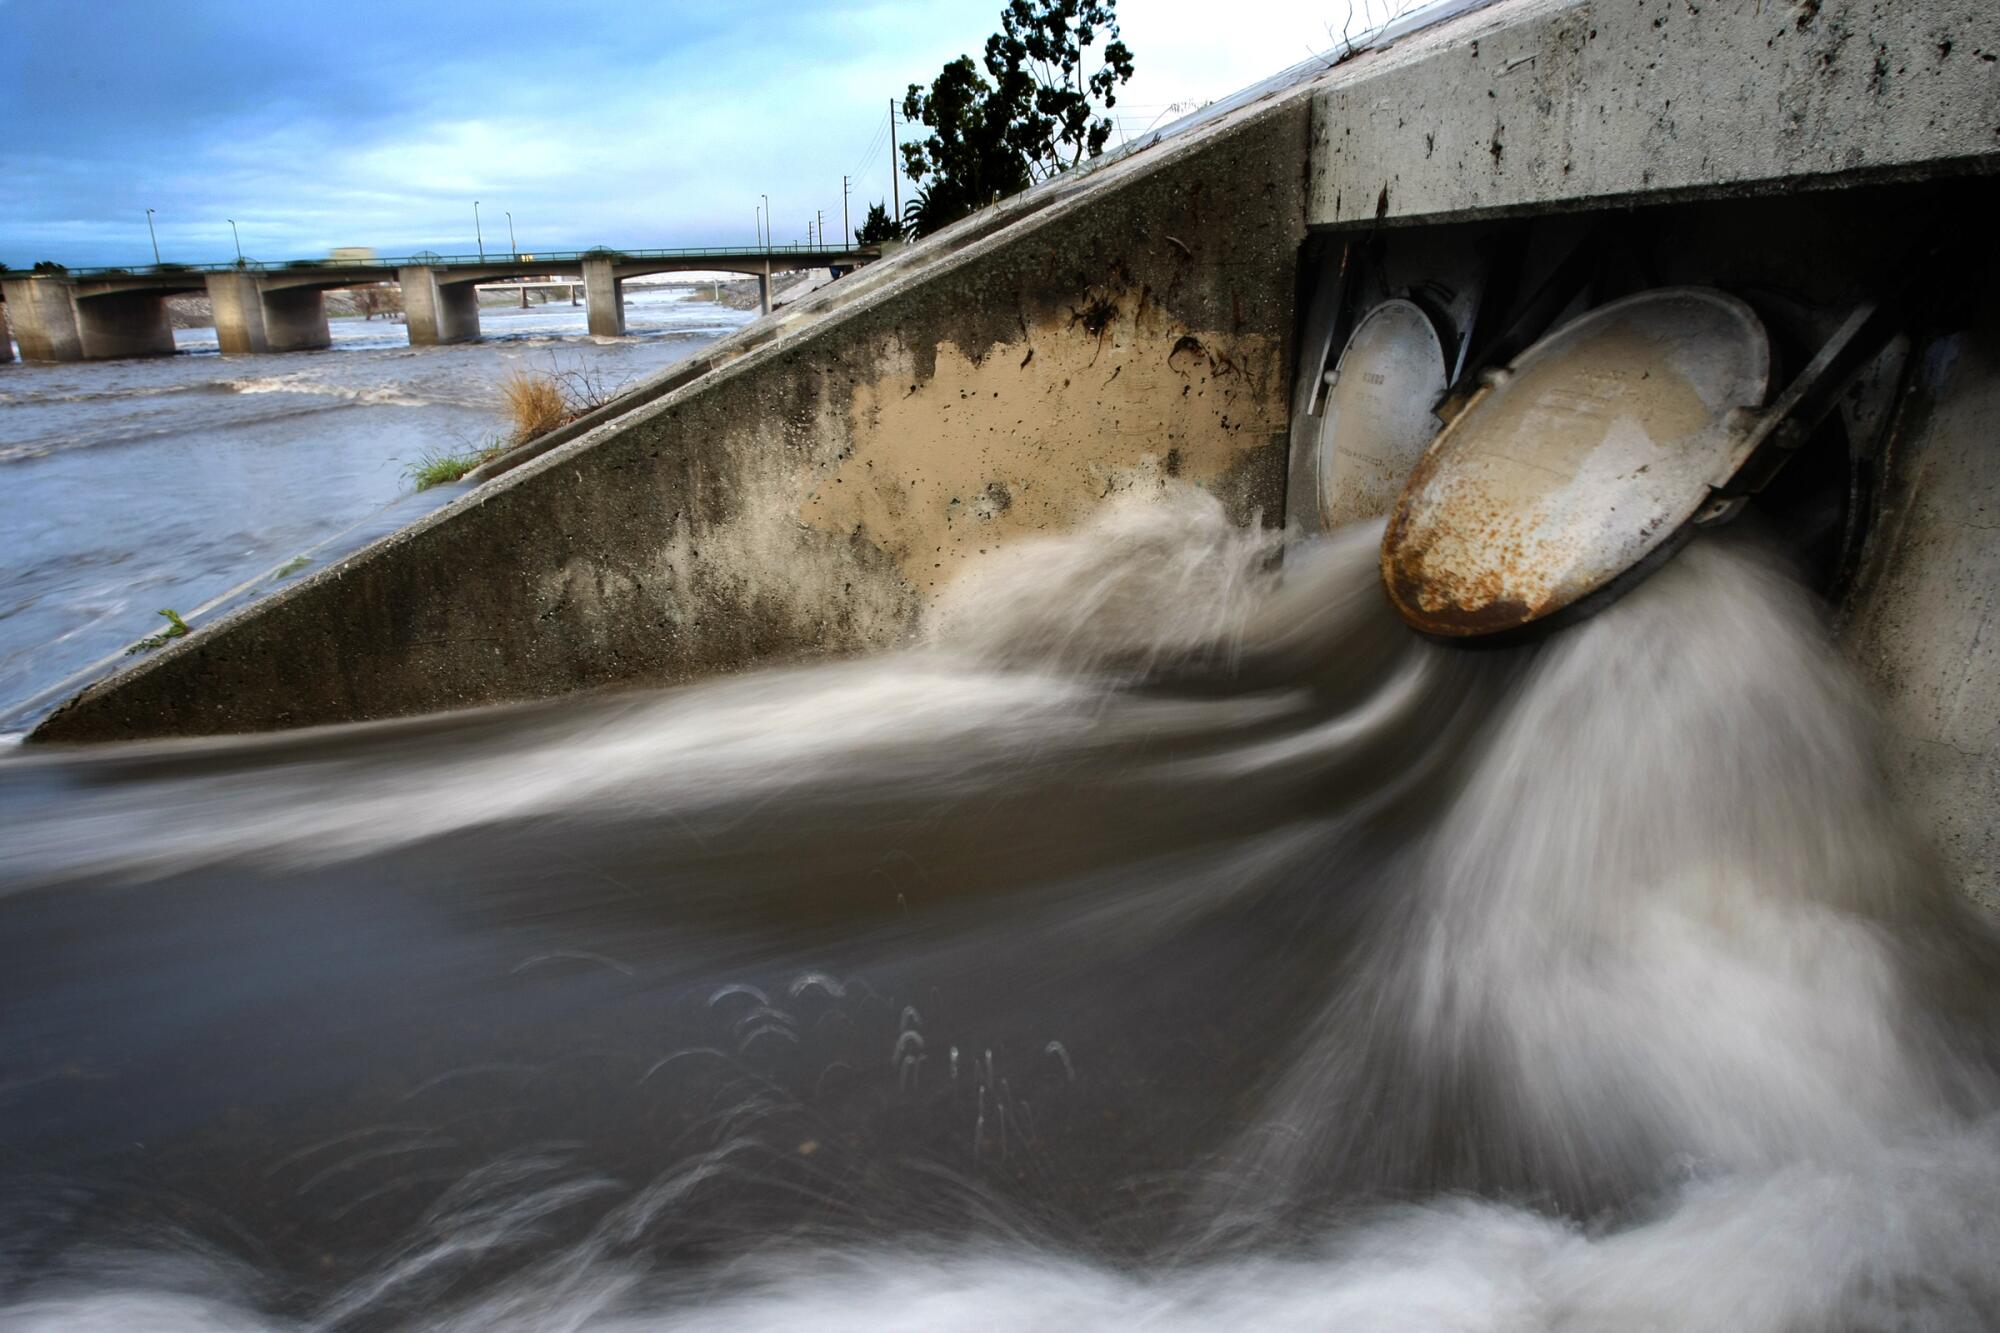 Stormwater surges from an outfall pipe into the Los Angeles River.